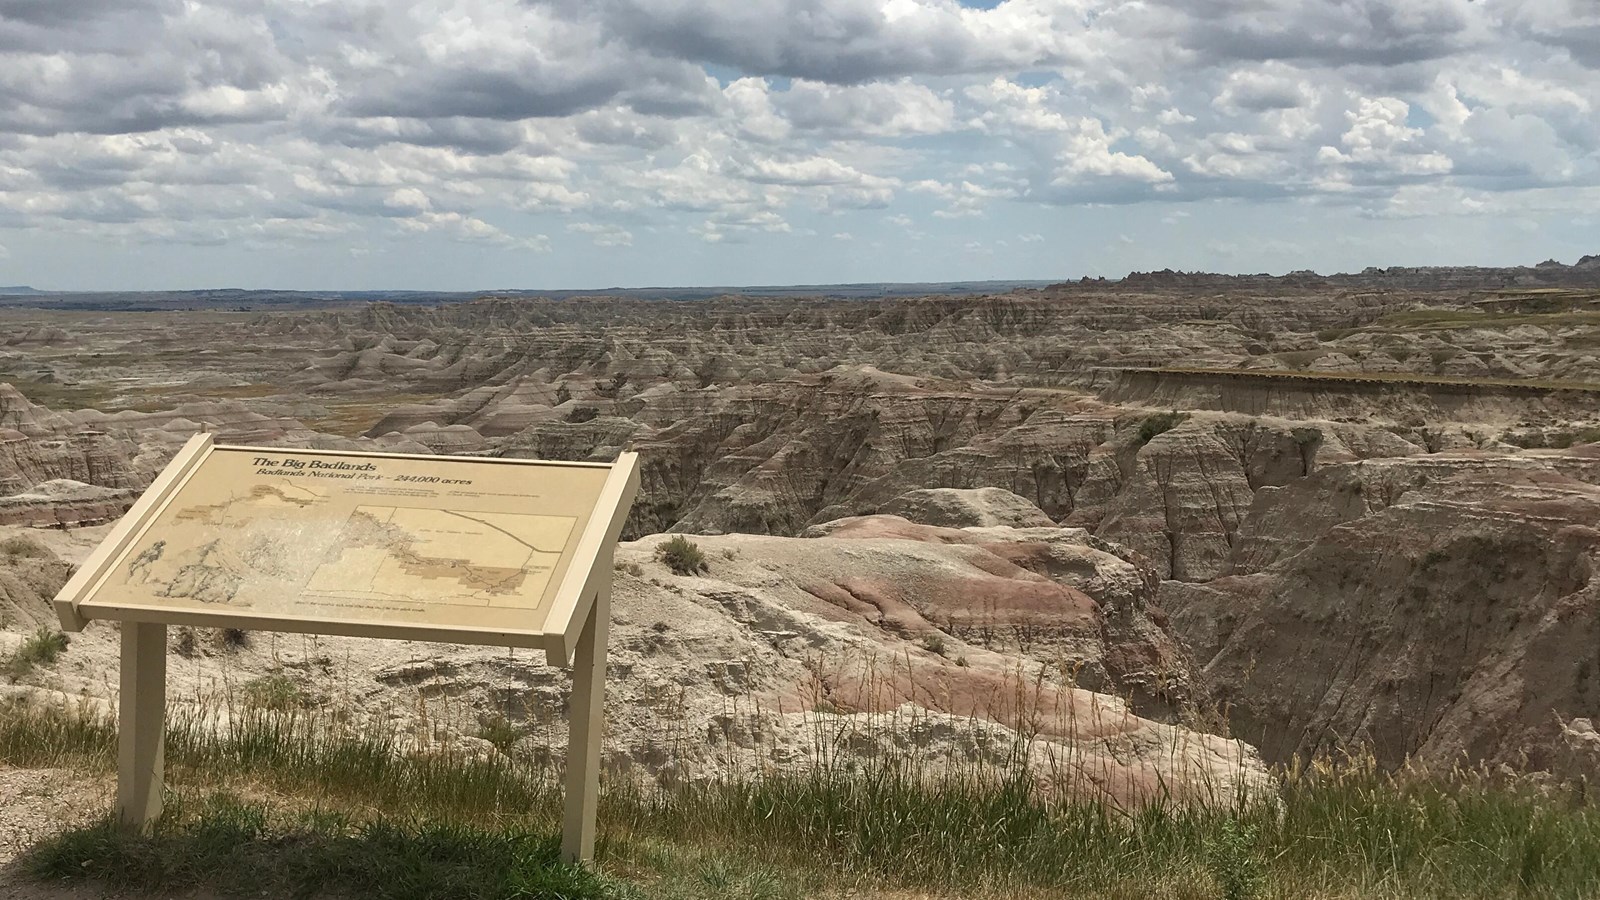 A wayside exhibit stands at the edge of drop off into badlands formations